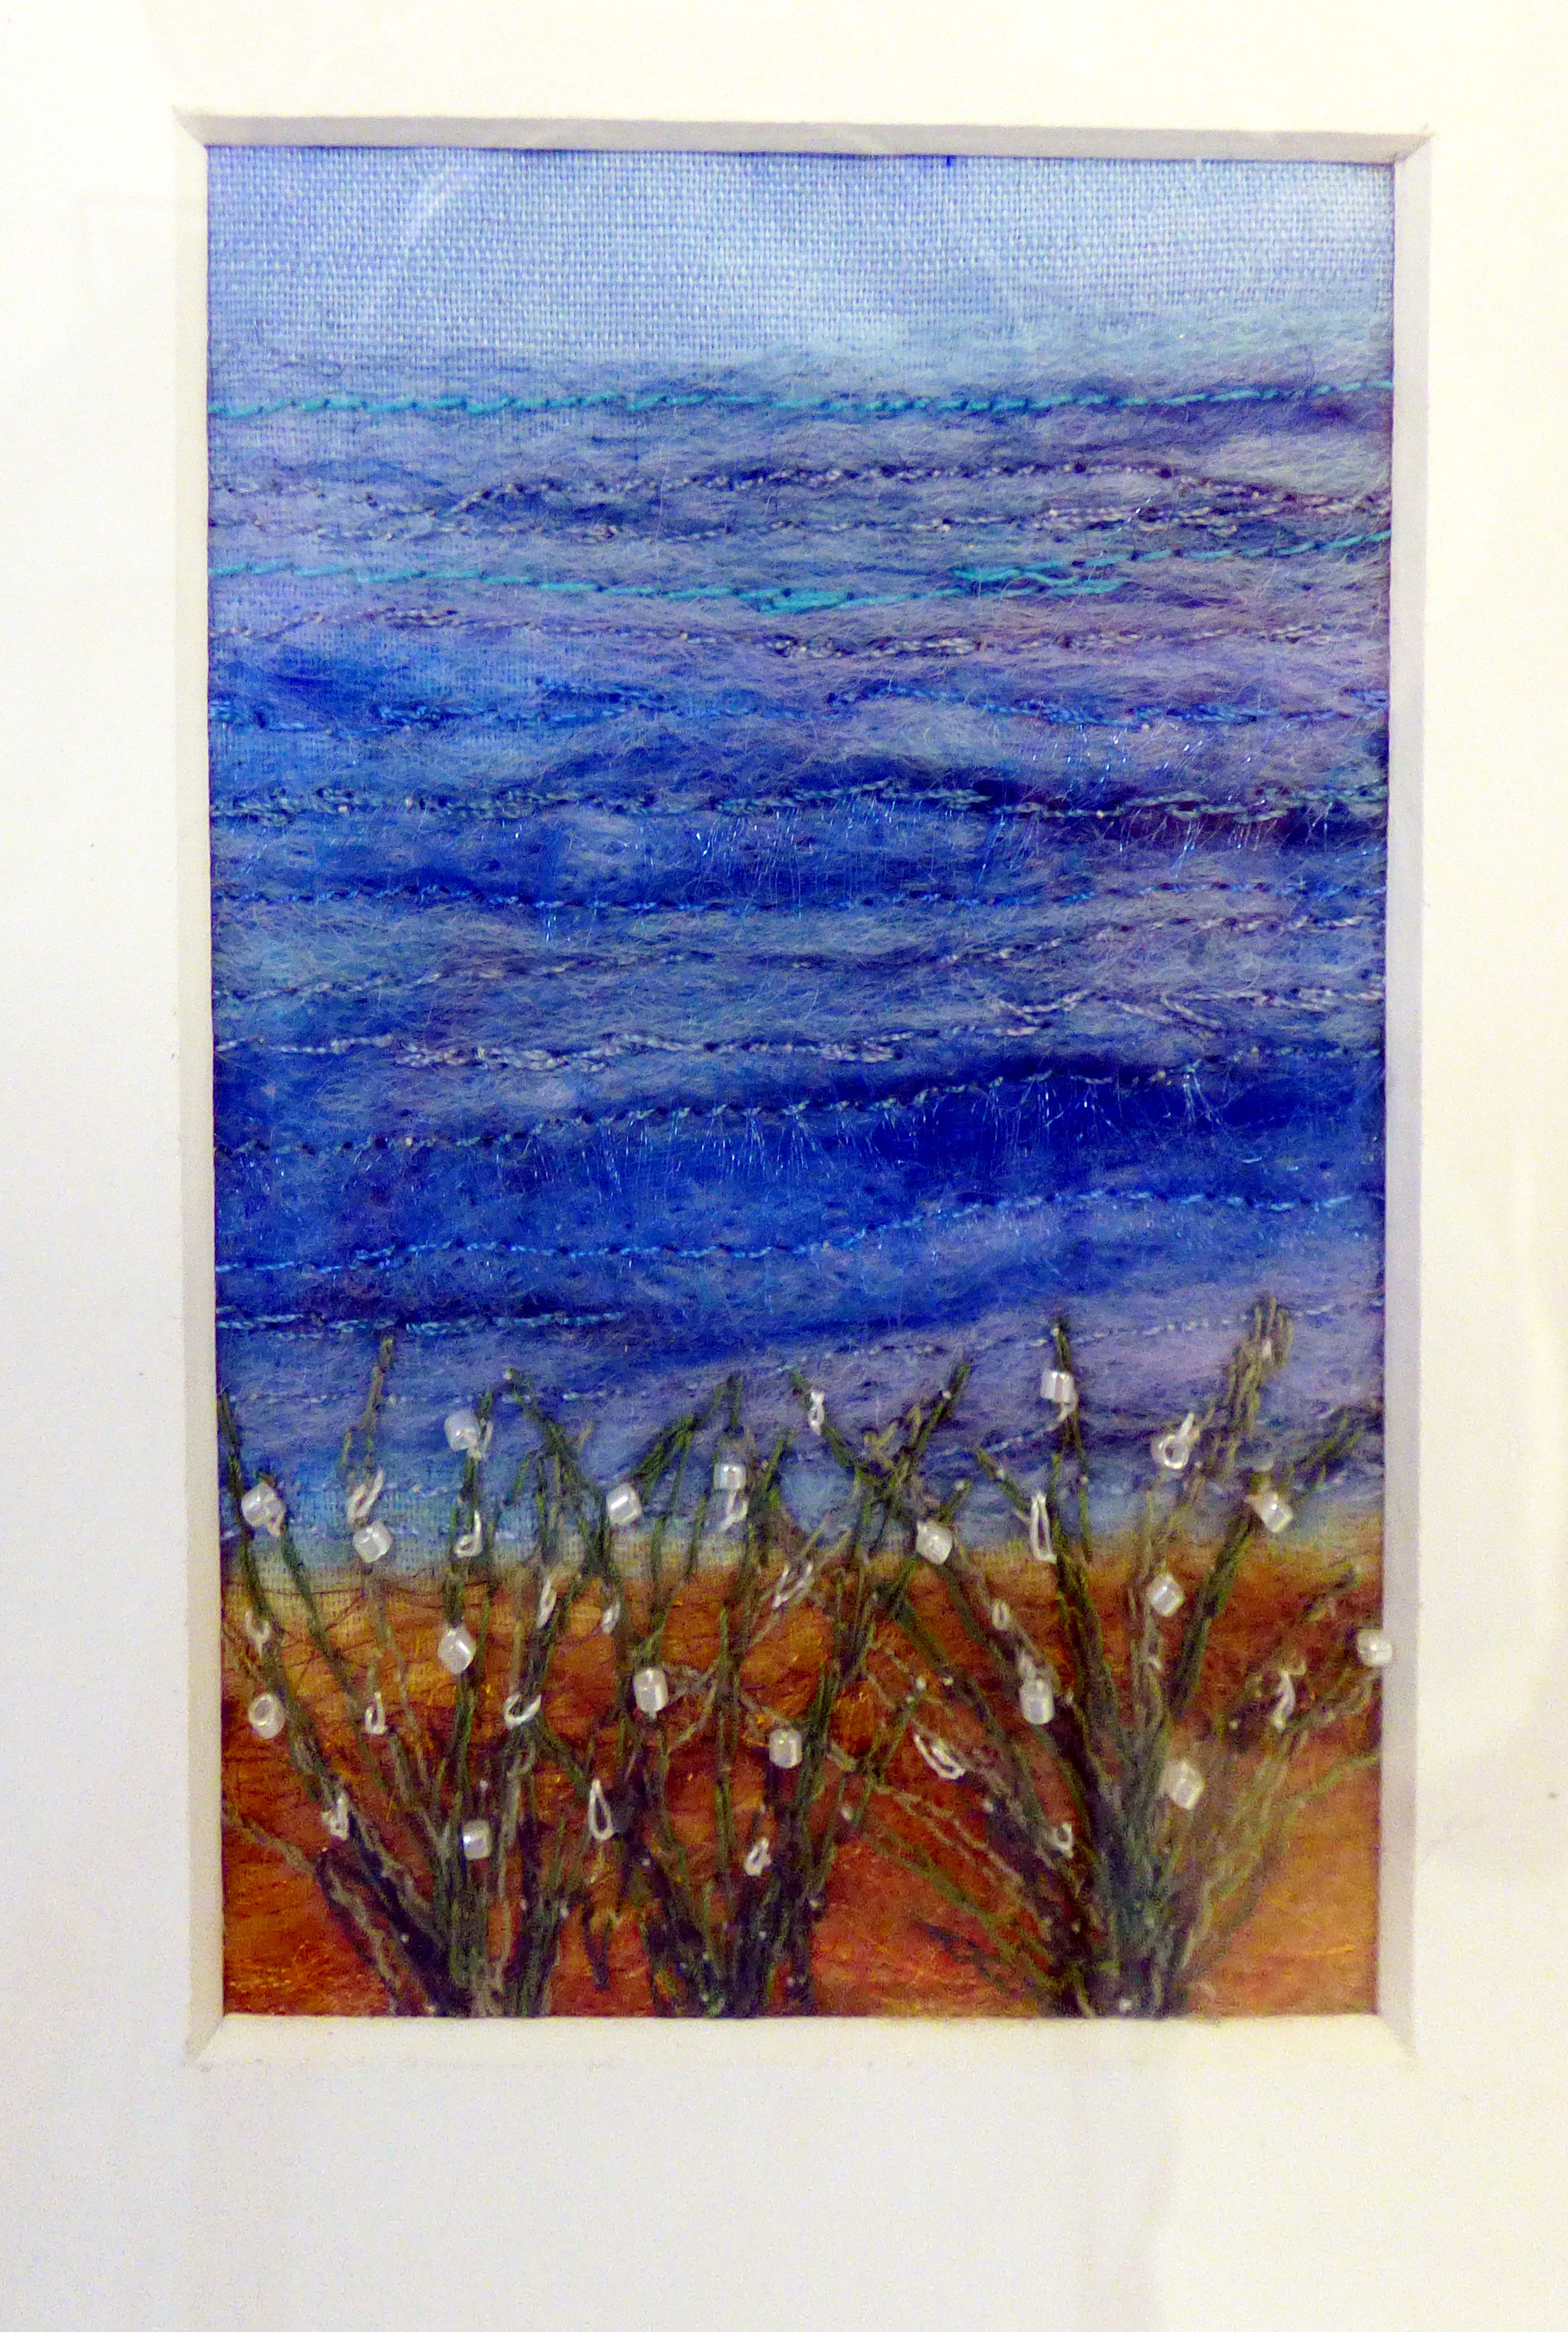 WATER'S EDGE by Joan Norton, free machine stitching on a hand felted background, ConText group 2018